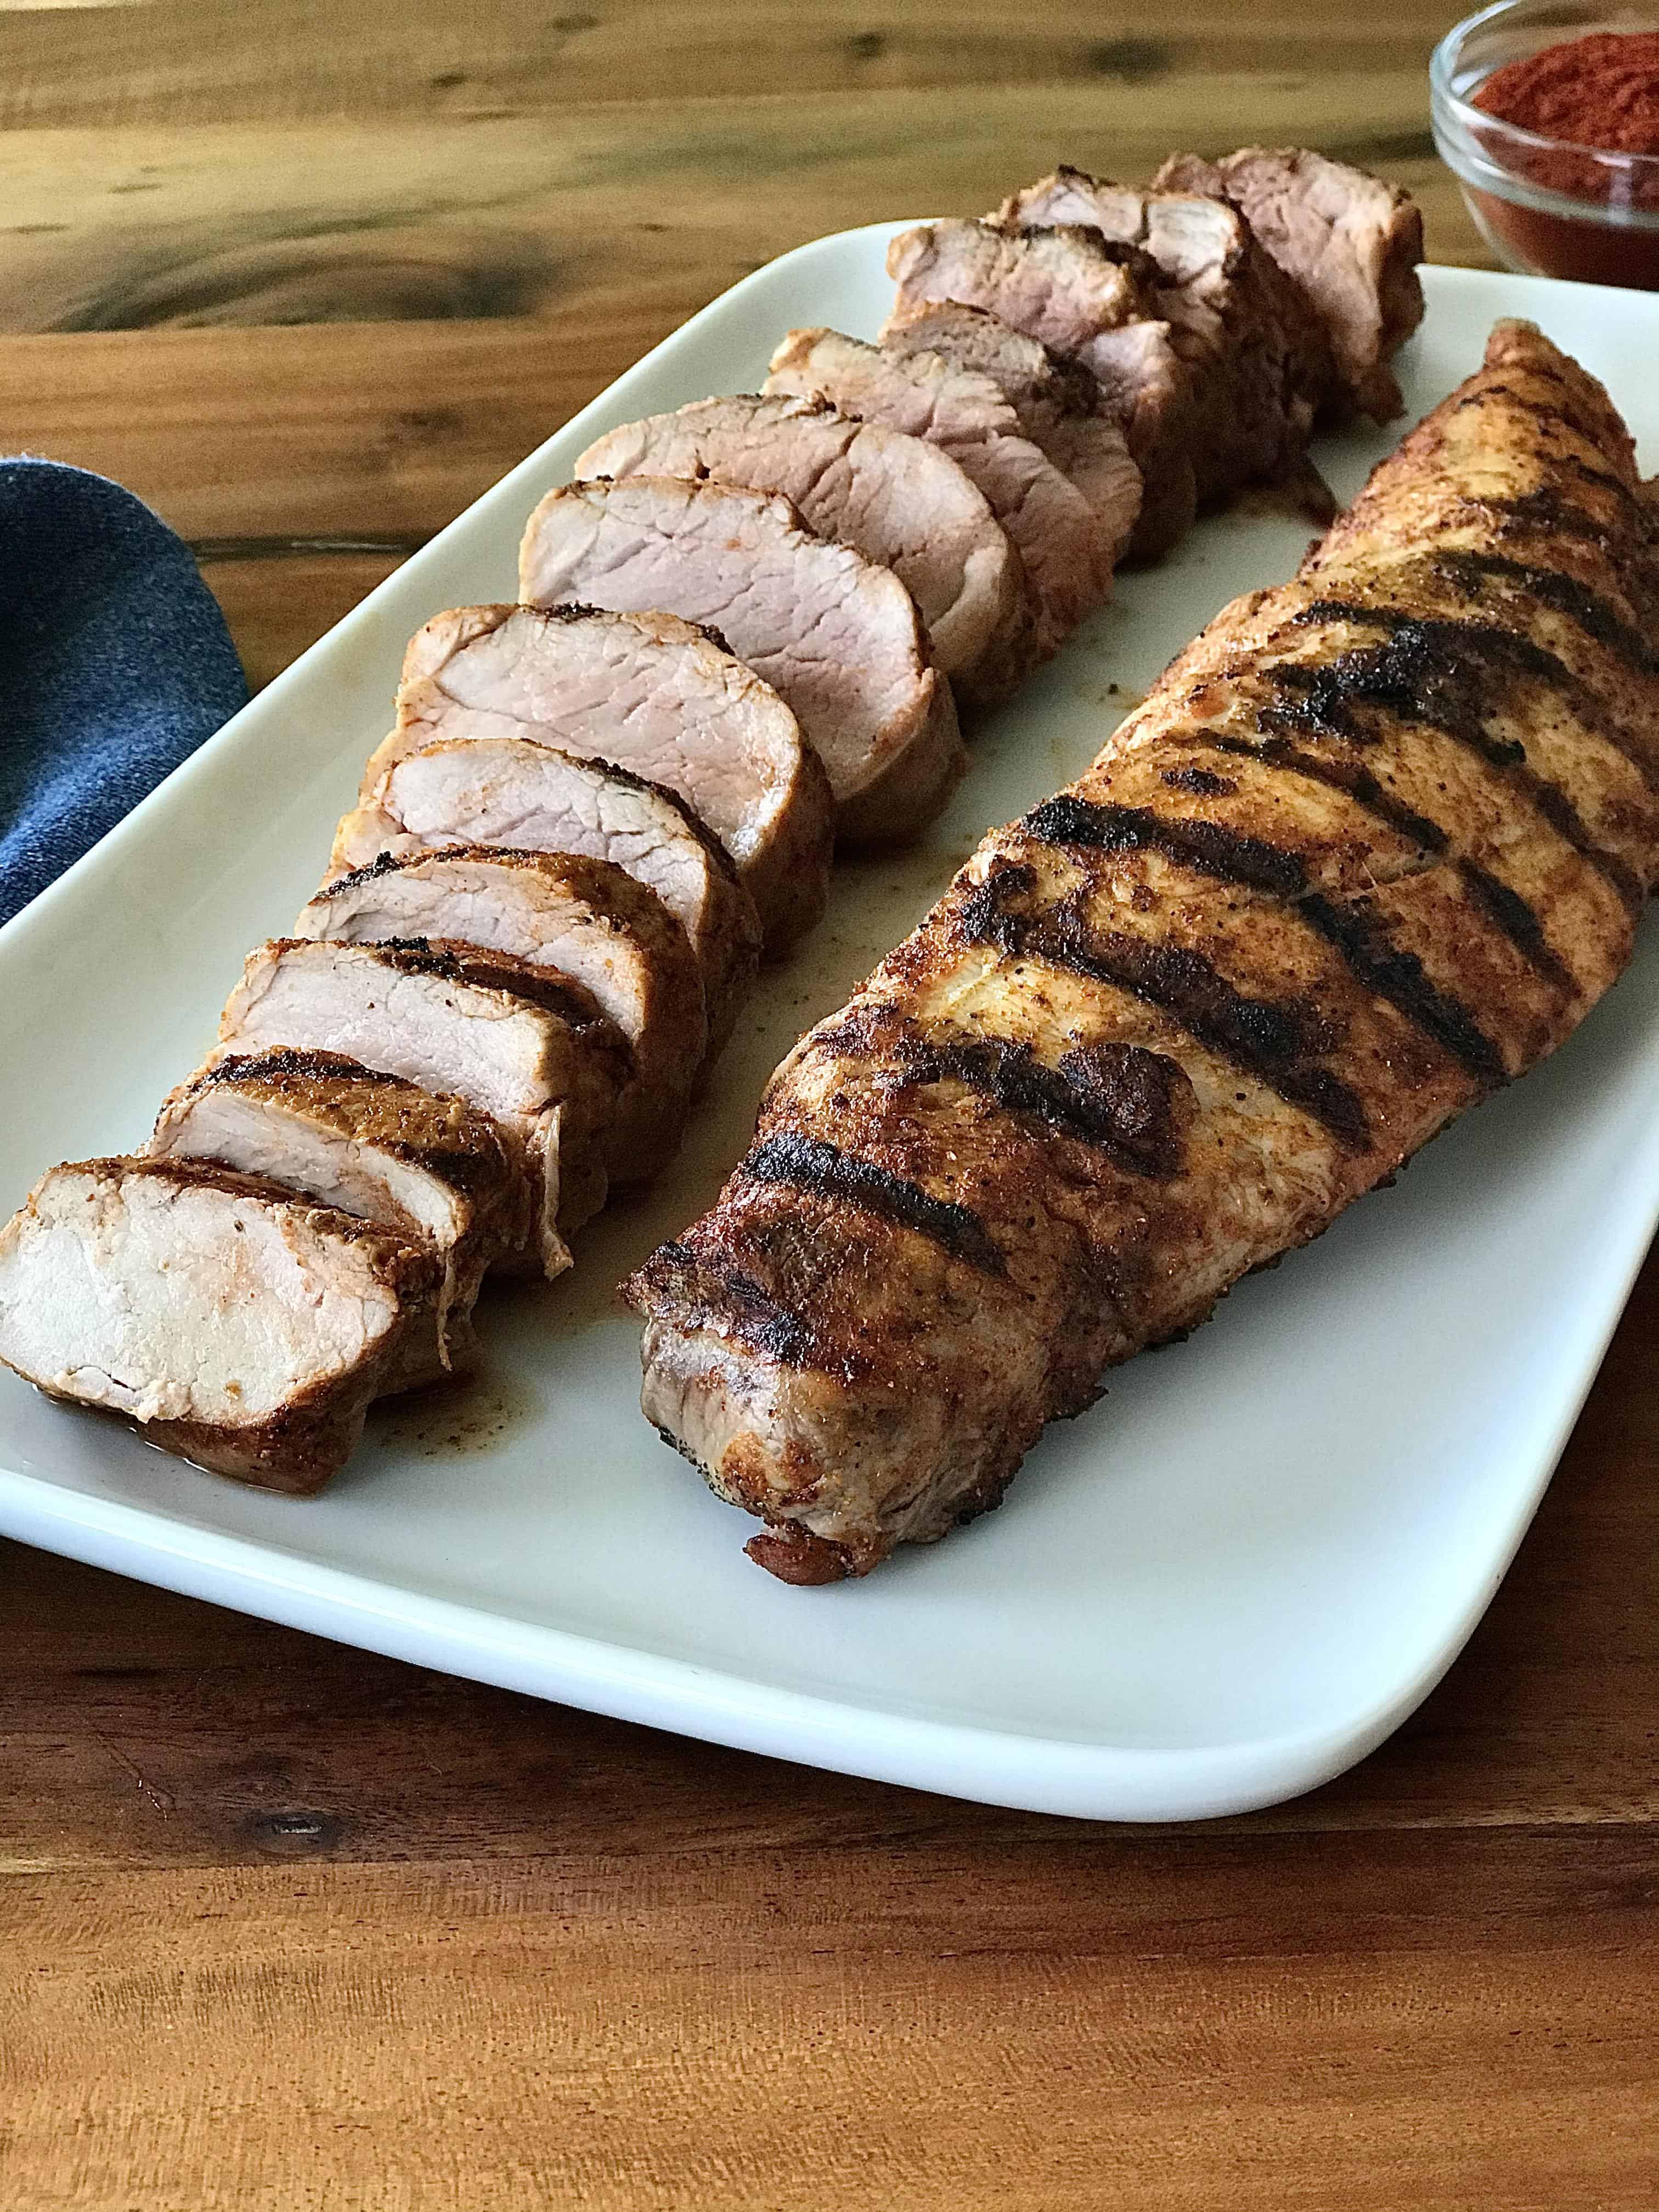 2 grilled pork tenderloins - one whole, one sliced - on a white platter on a wooden table